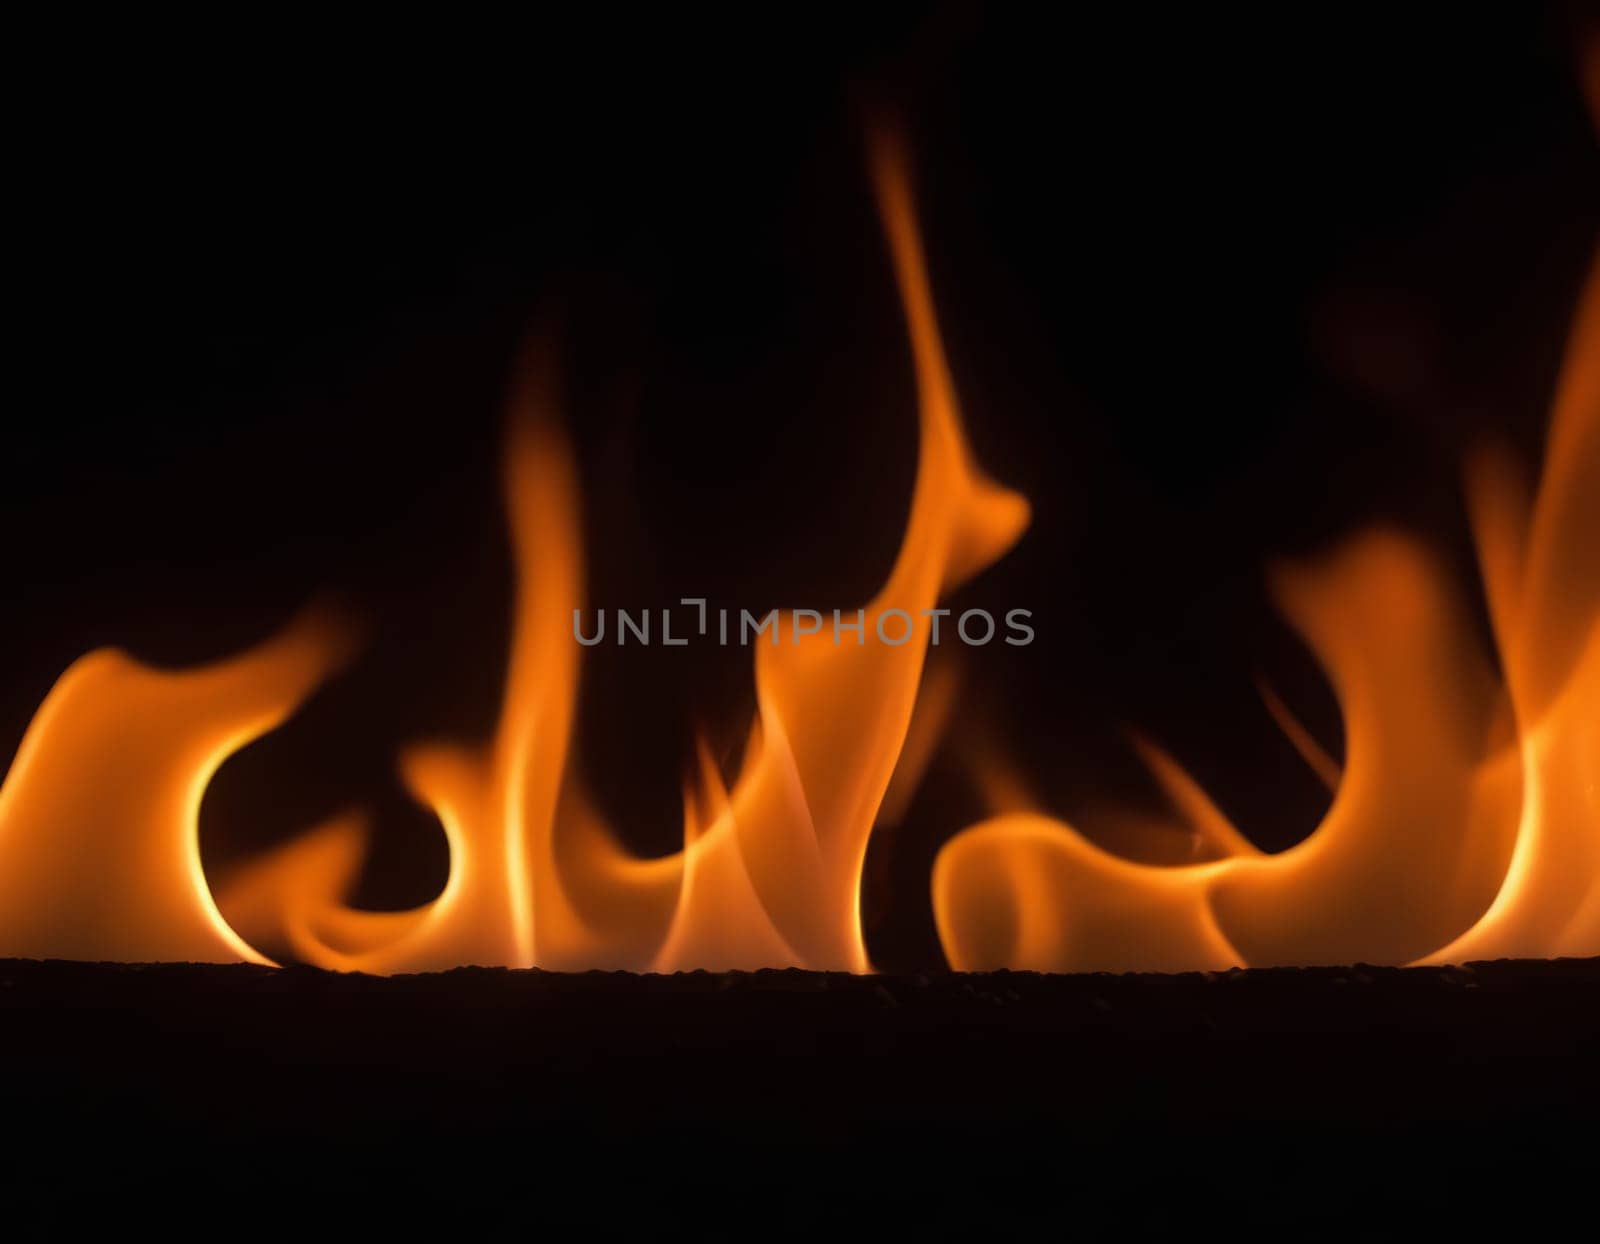 A close-up view of dynamic and intense flames in various shades of orange, yellow, and red, creating a contrast with the dark background and conveying a sense of heat and energy